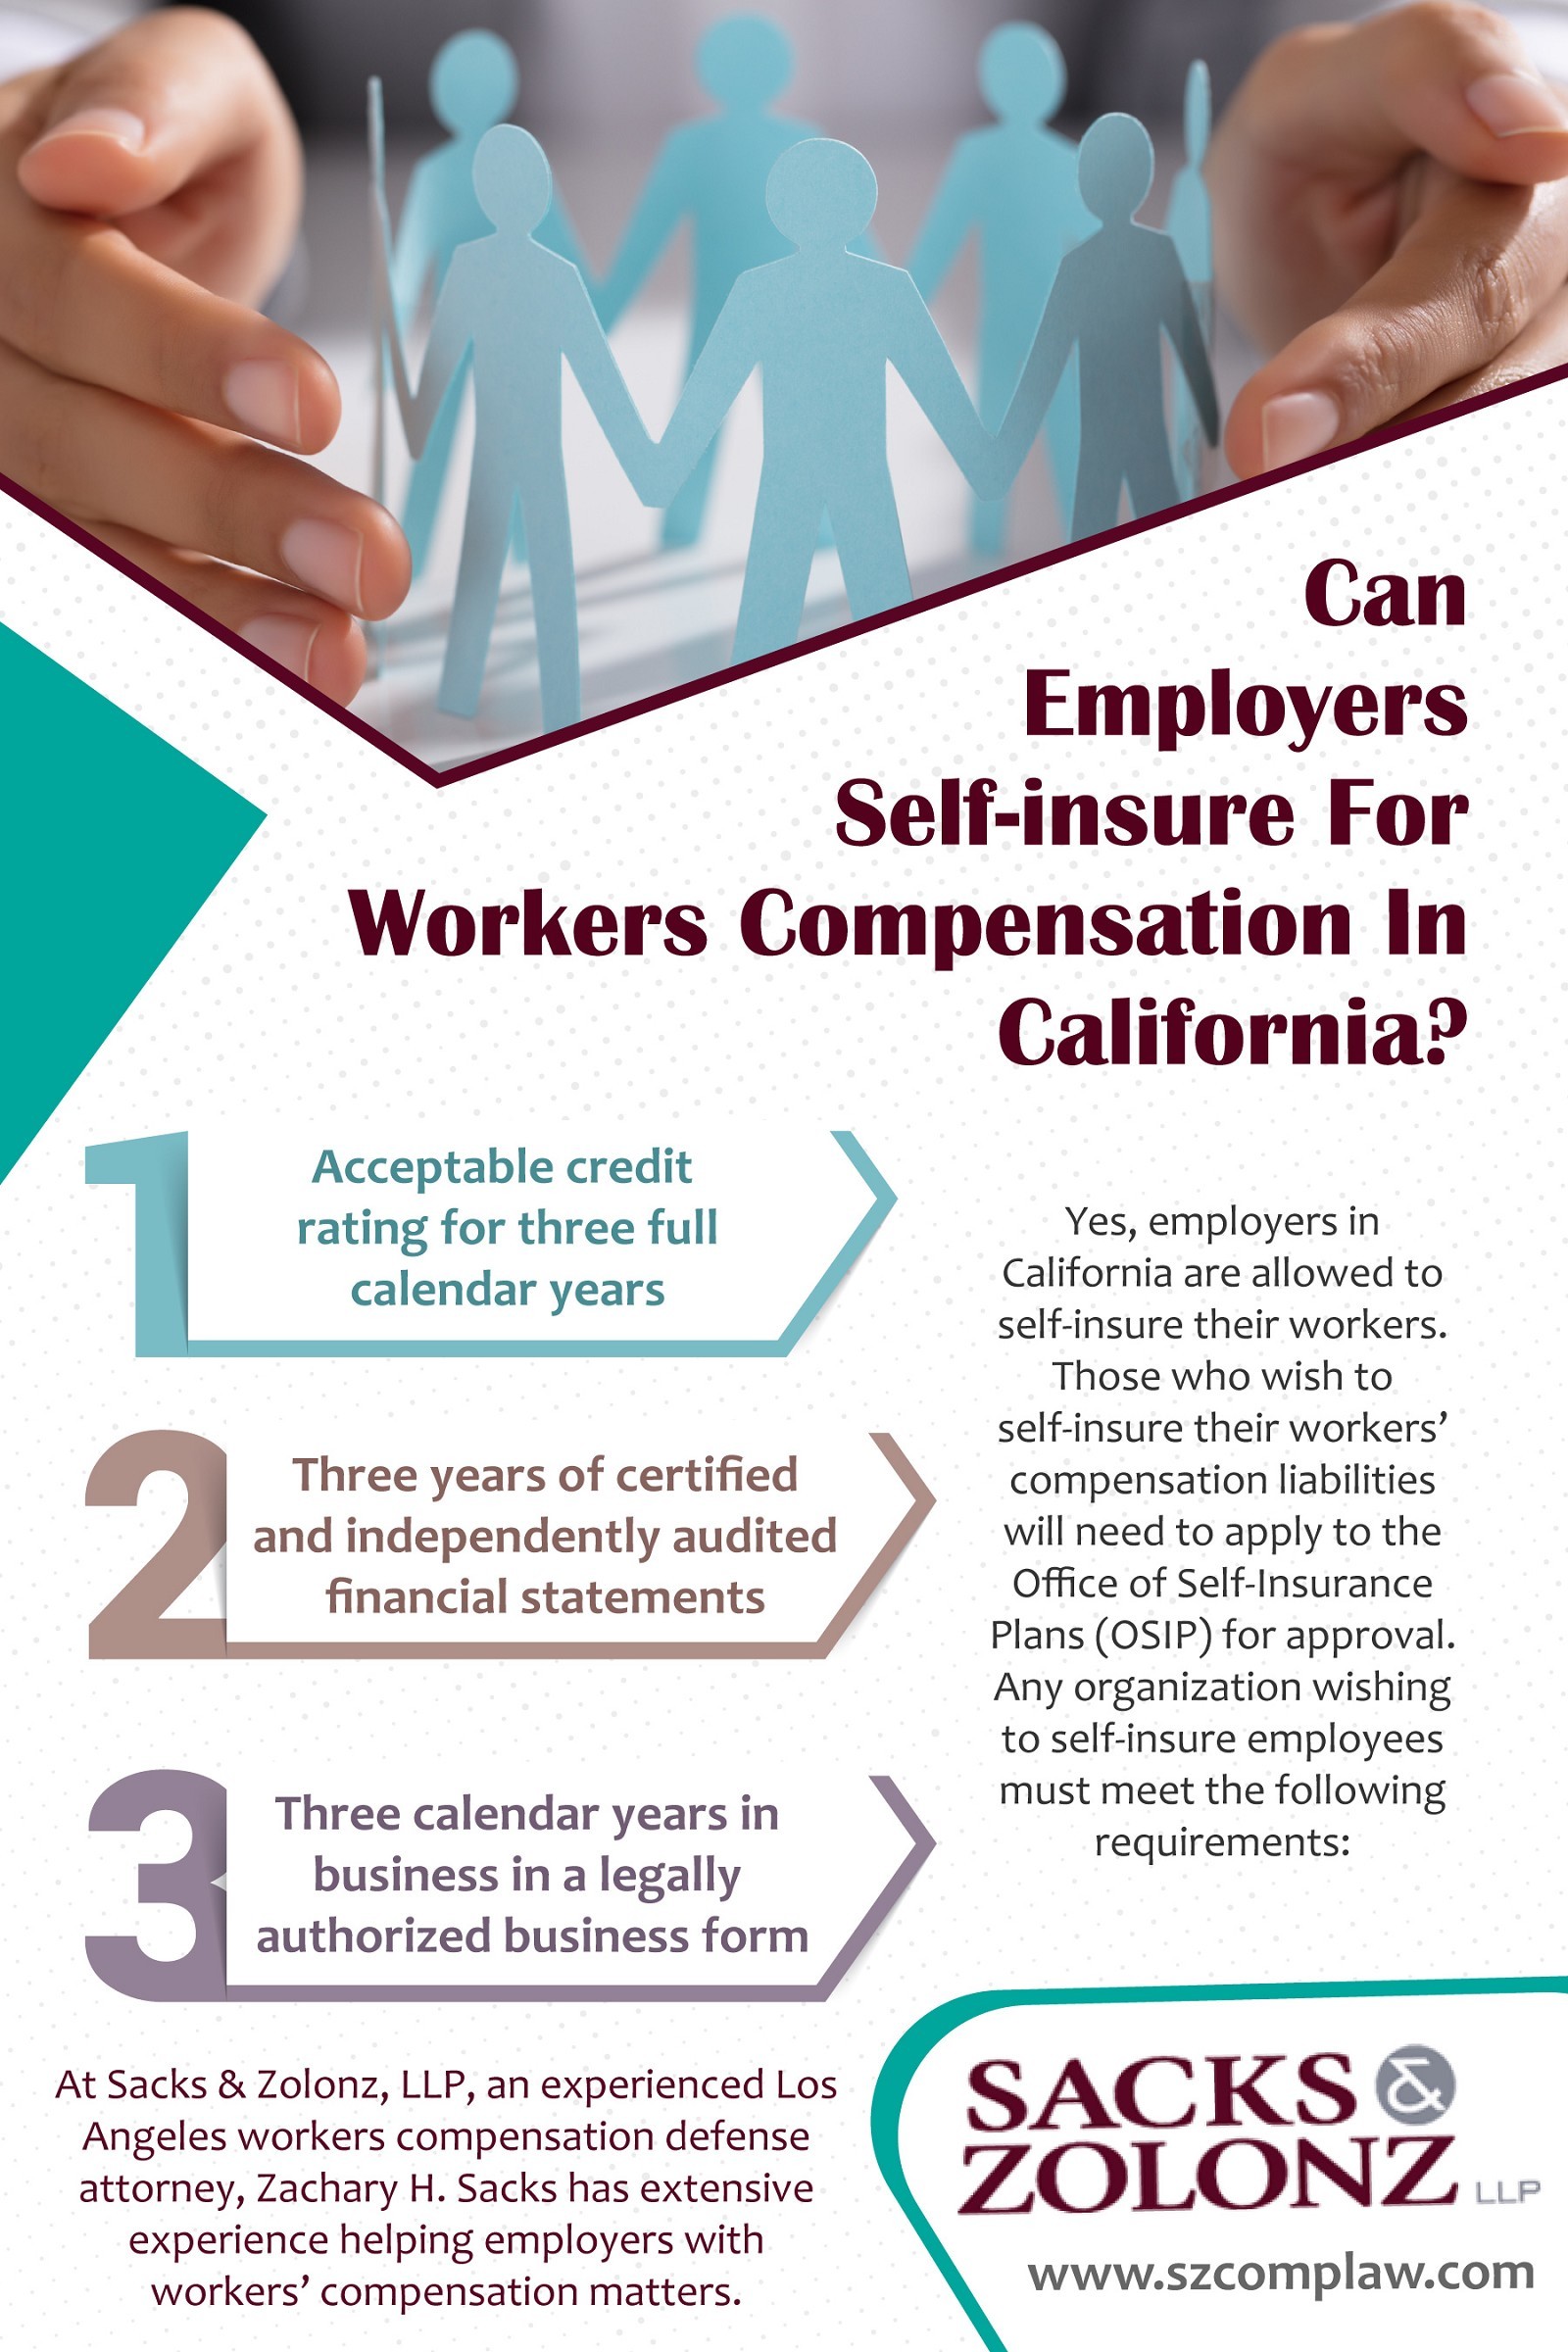 Can Employers Self-insure For Workers Compensation In California?